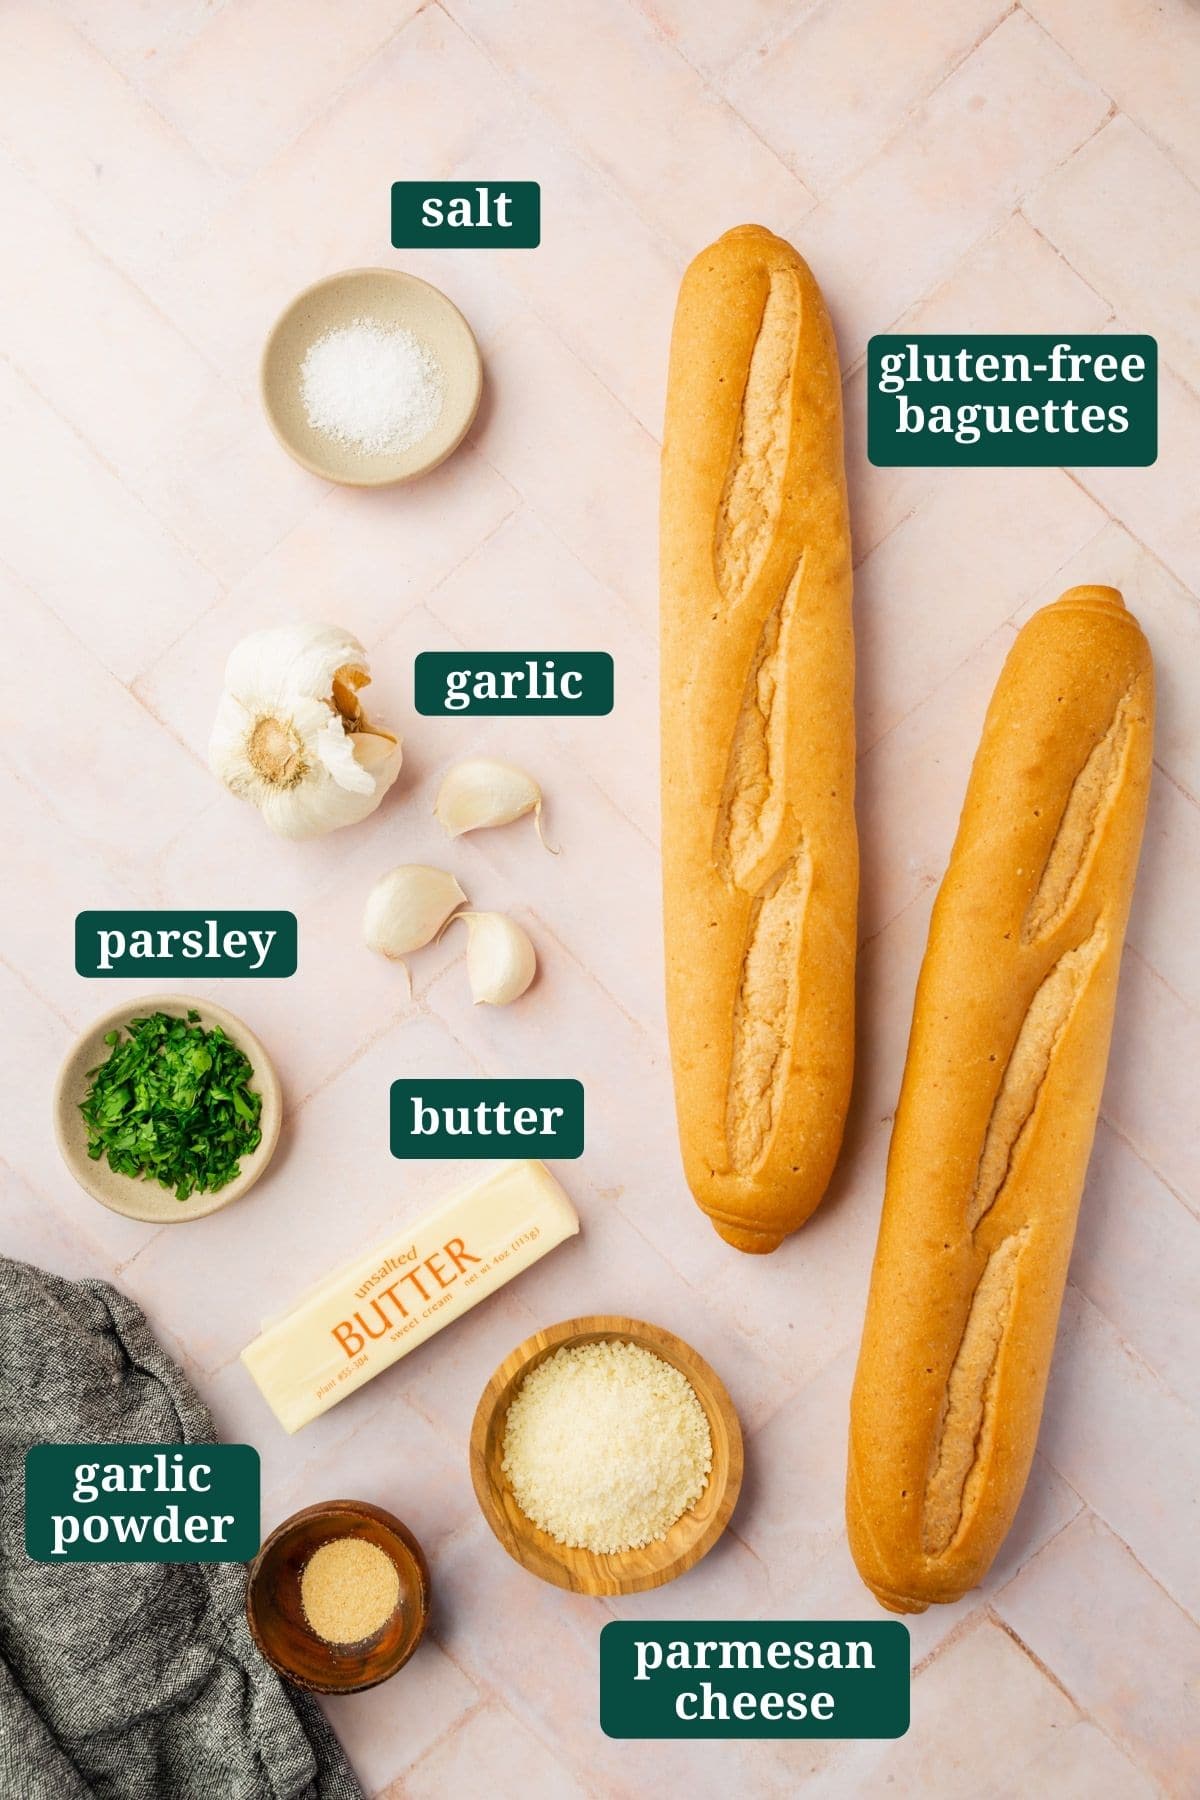 Ingredients for making gluten-free garlic bread with text overlay over each ingredient.